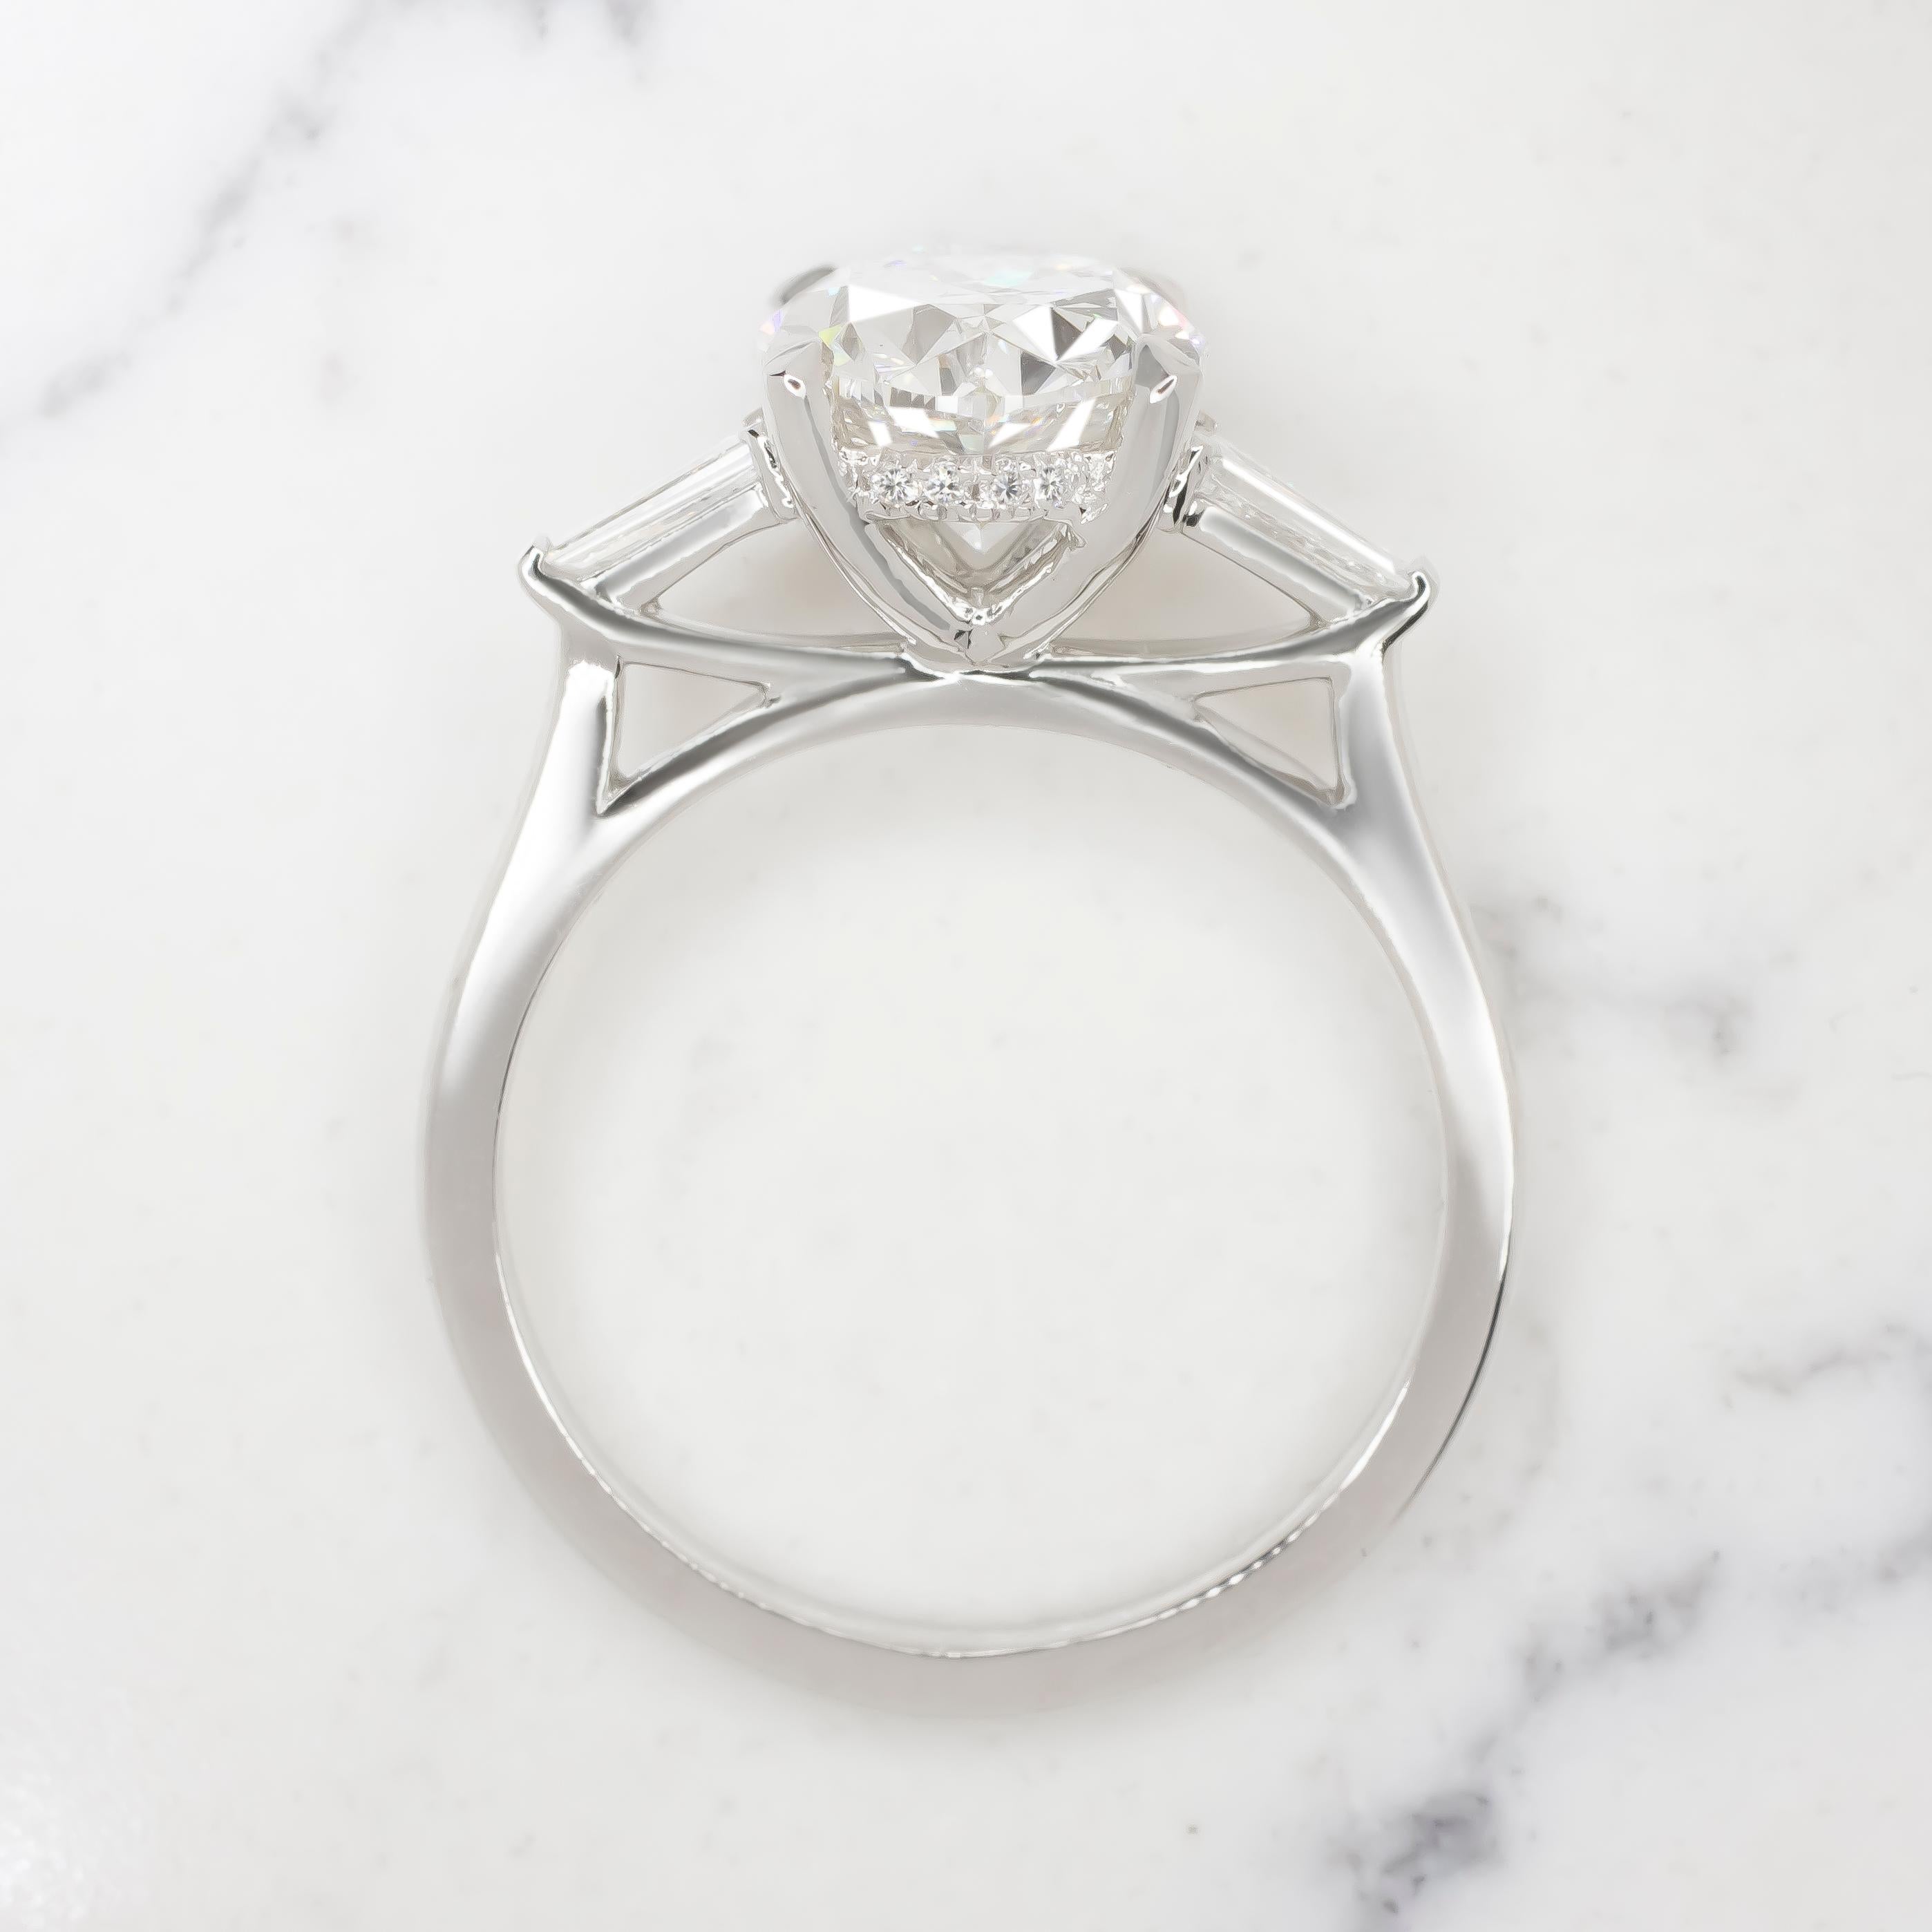 This Antinori Di Sanpietro ring, featuring a breathtaking 3.01-carat GIA-certified oval brilliant cut diamond, is a paragon of luxurious design set in 18-carat white gold. The diamond's SI1 clarity and excellent polish highlight its natural beauty